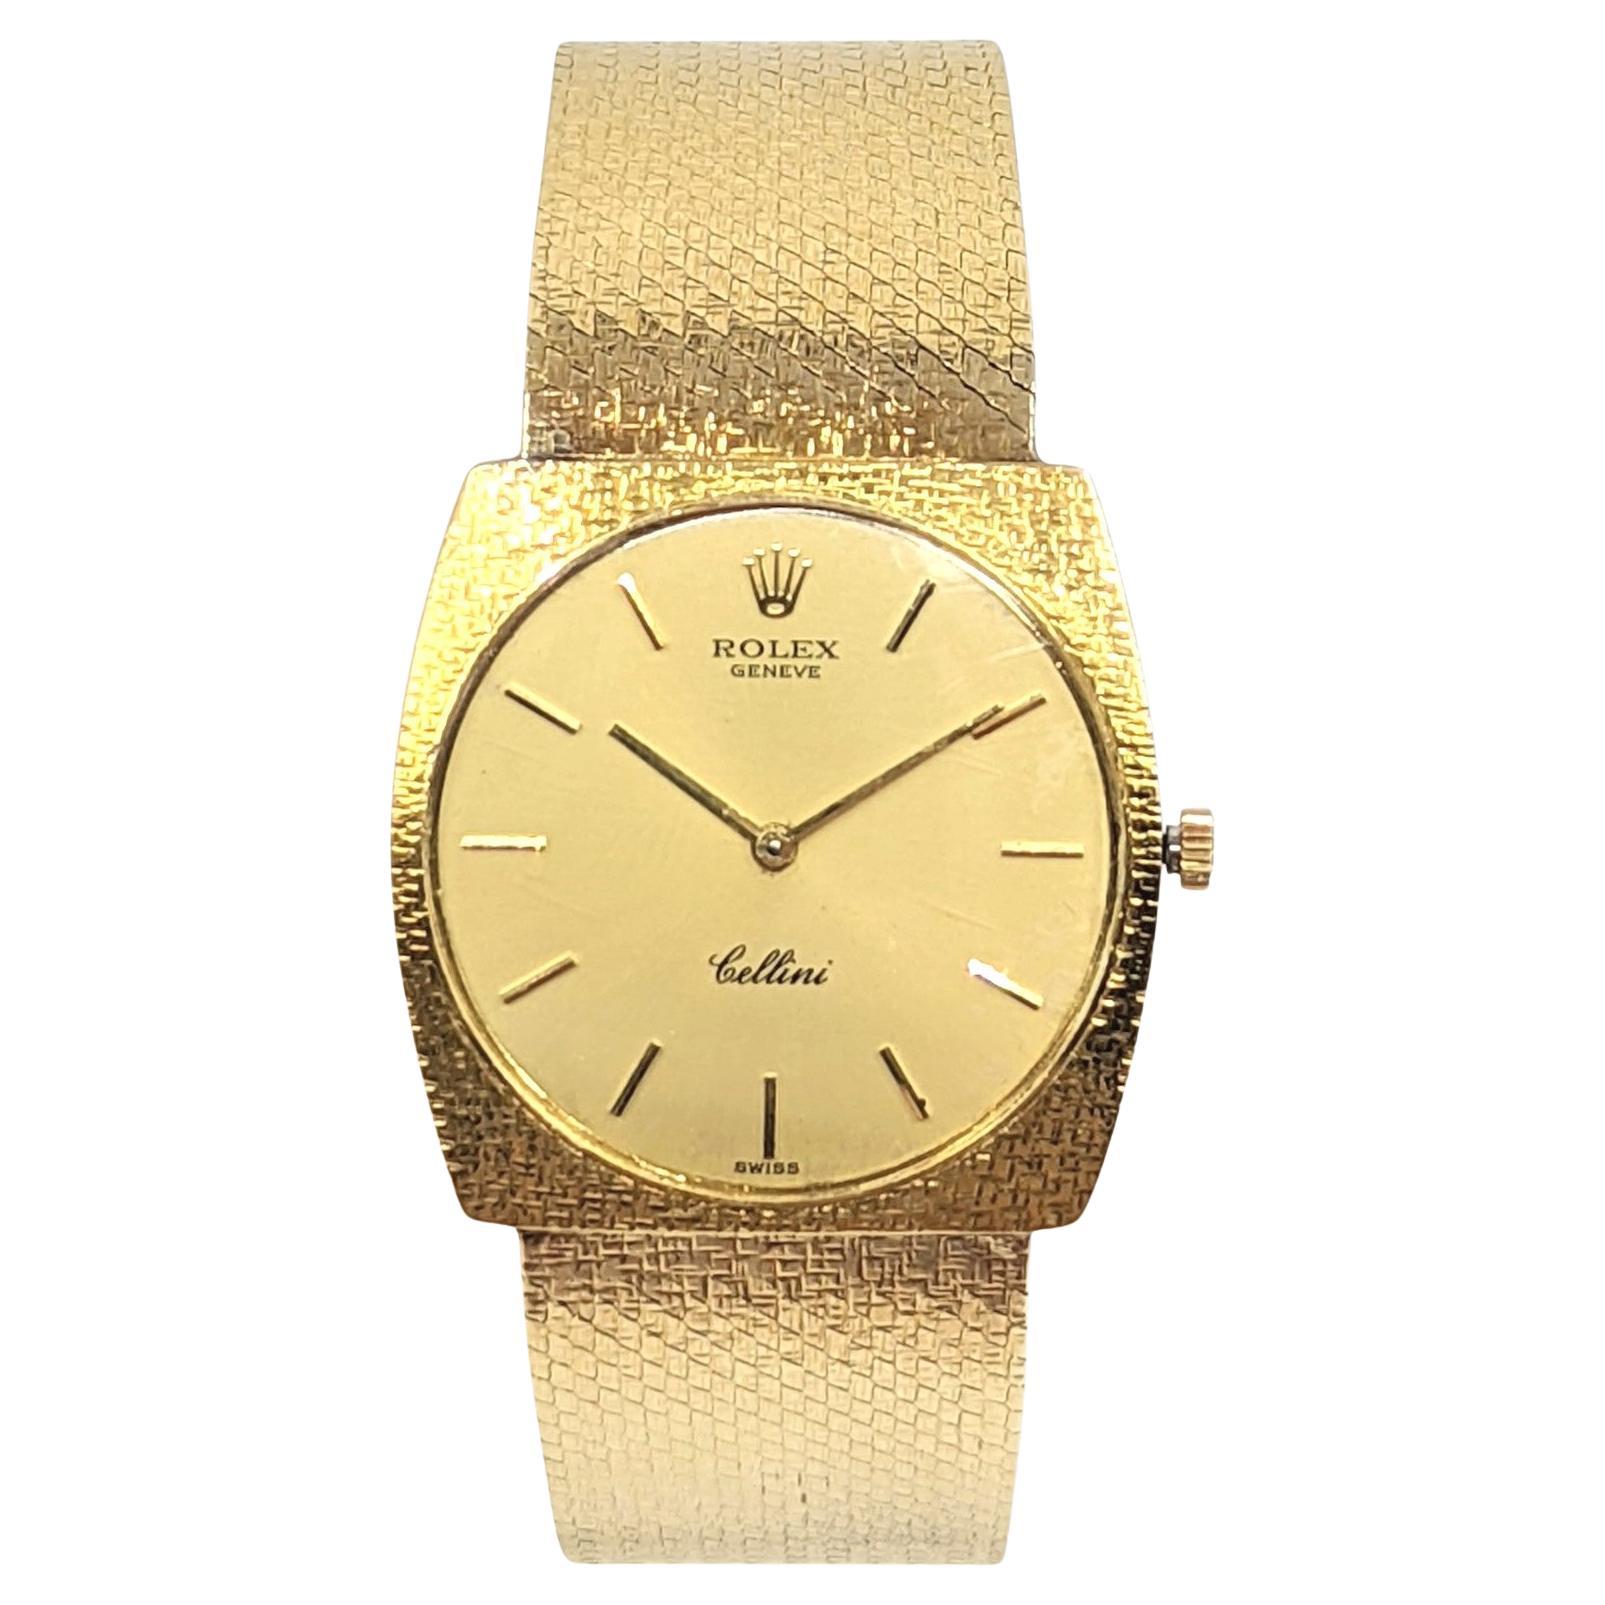 Gent's Vintage Rolex Cellini Bracelet Watch in Solid 18k Yellow Gold Ref. 3800 For Sale